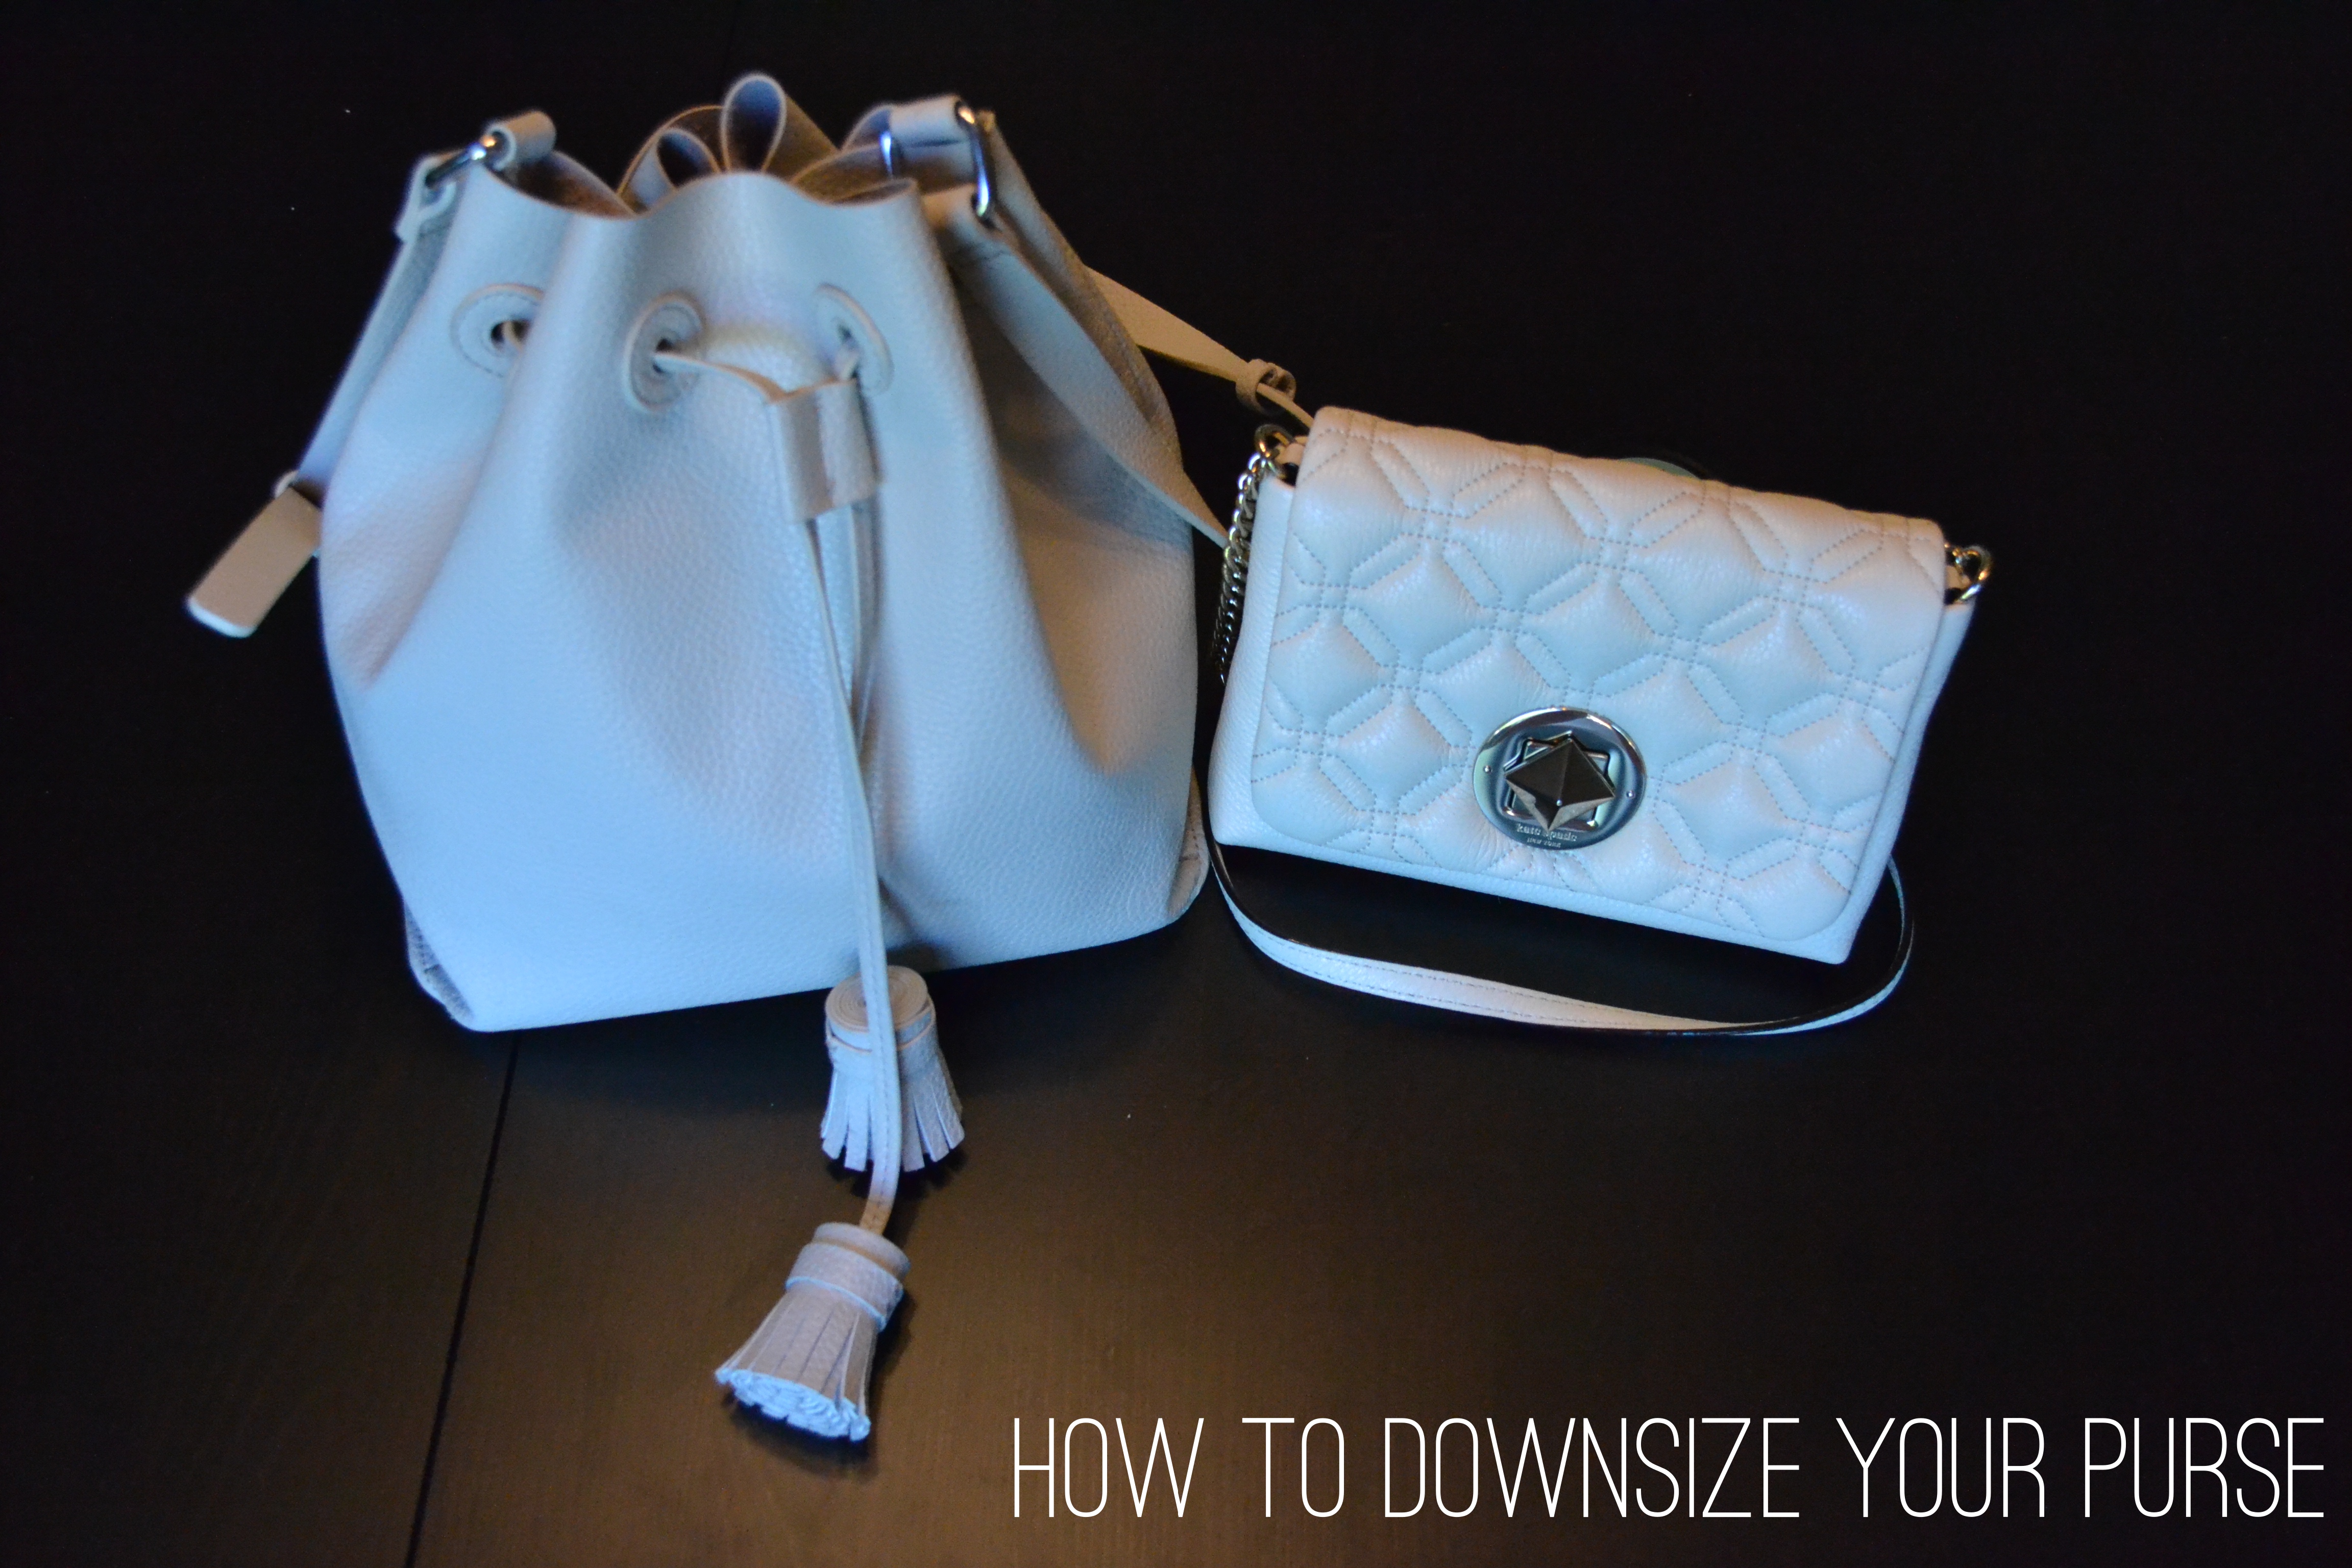 How to downsize your purse